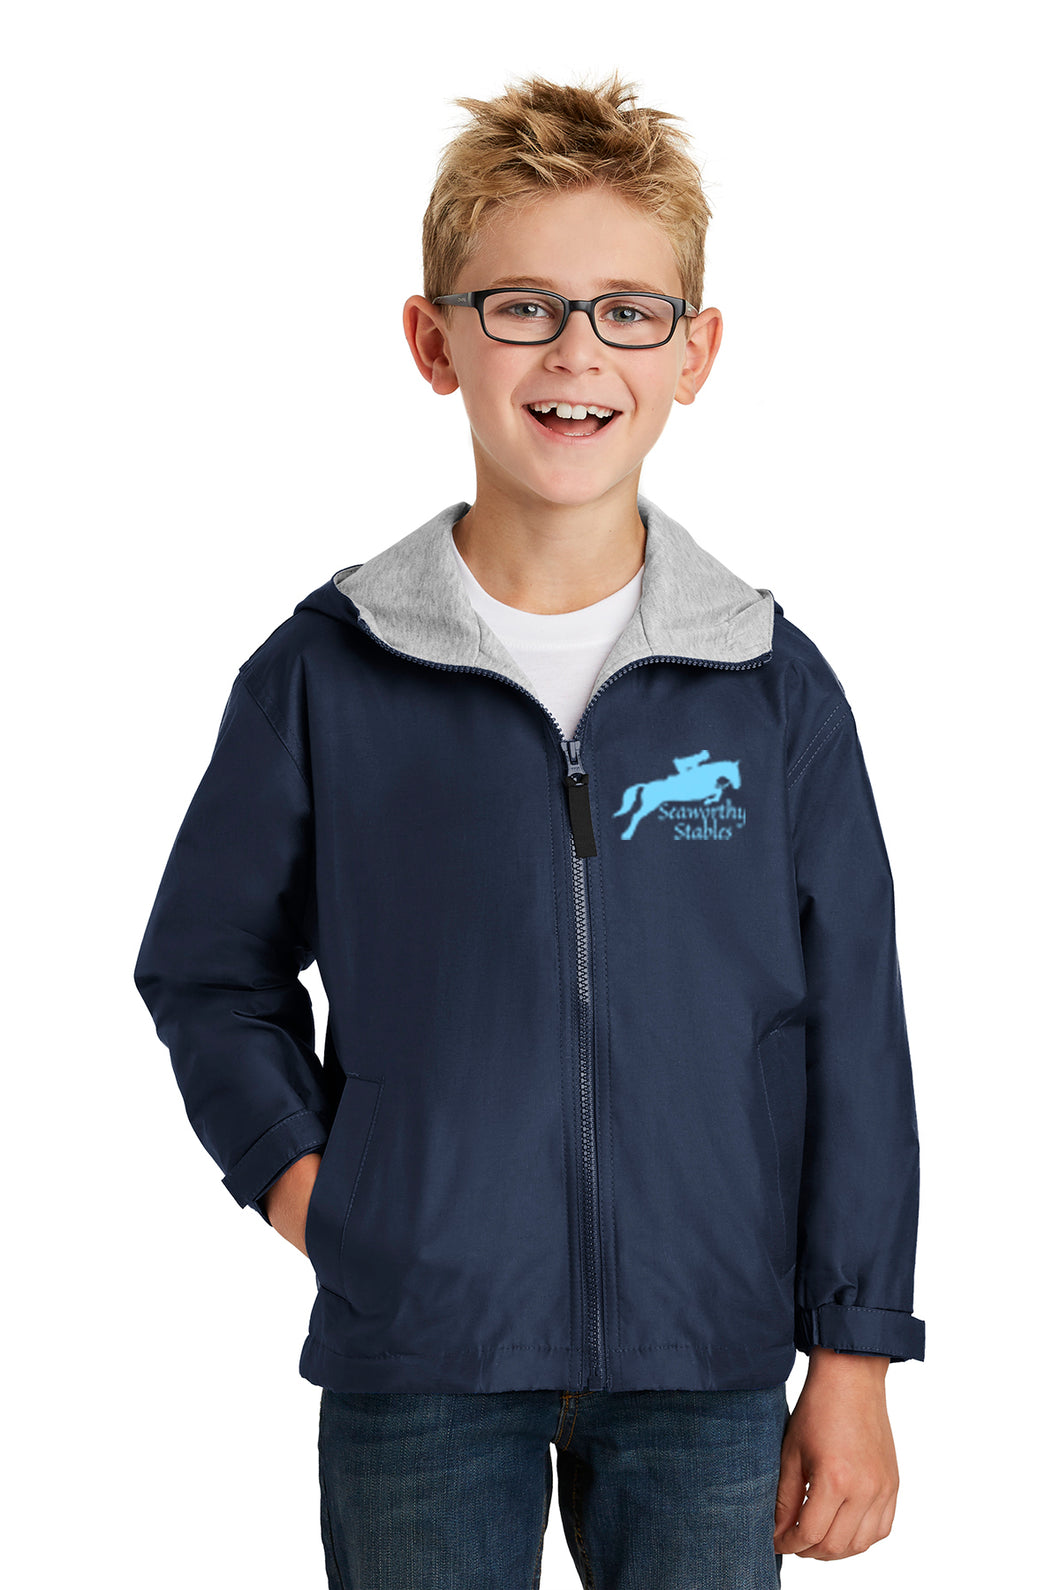 Seaworthy Stables - Port Authority- YOUTH Jacket